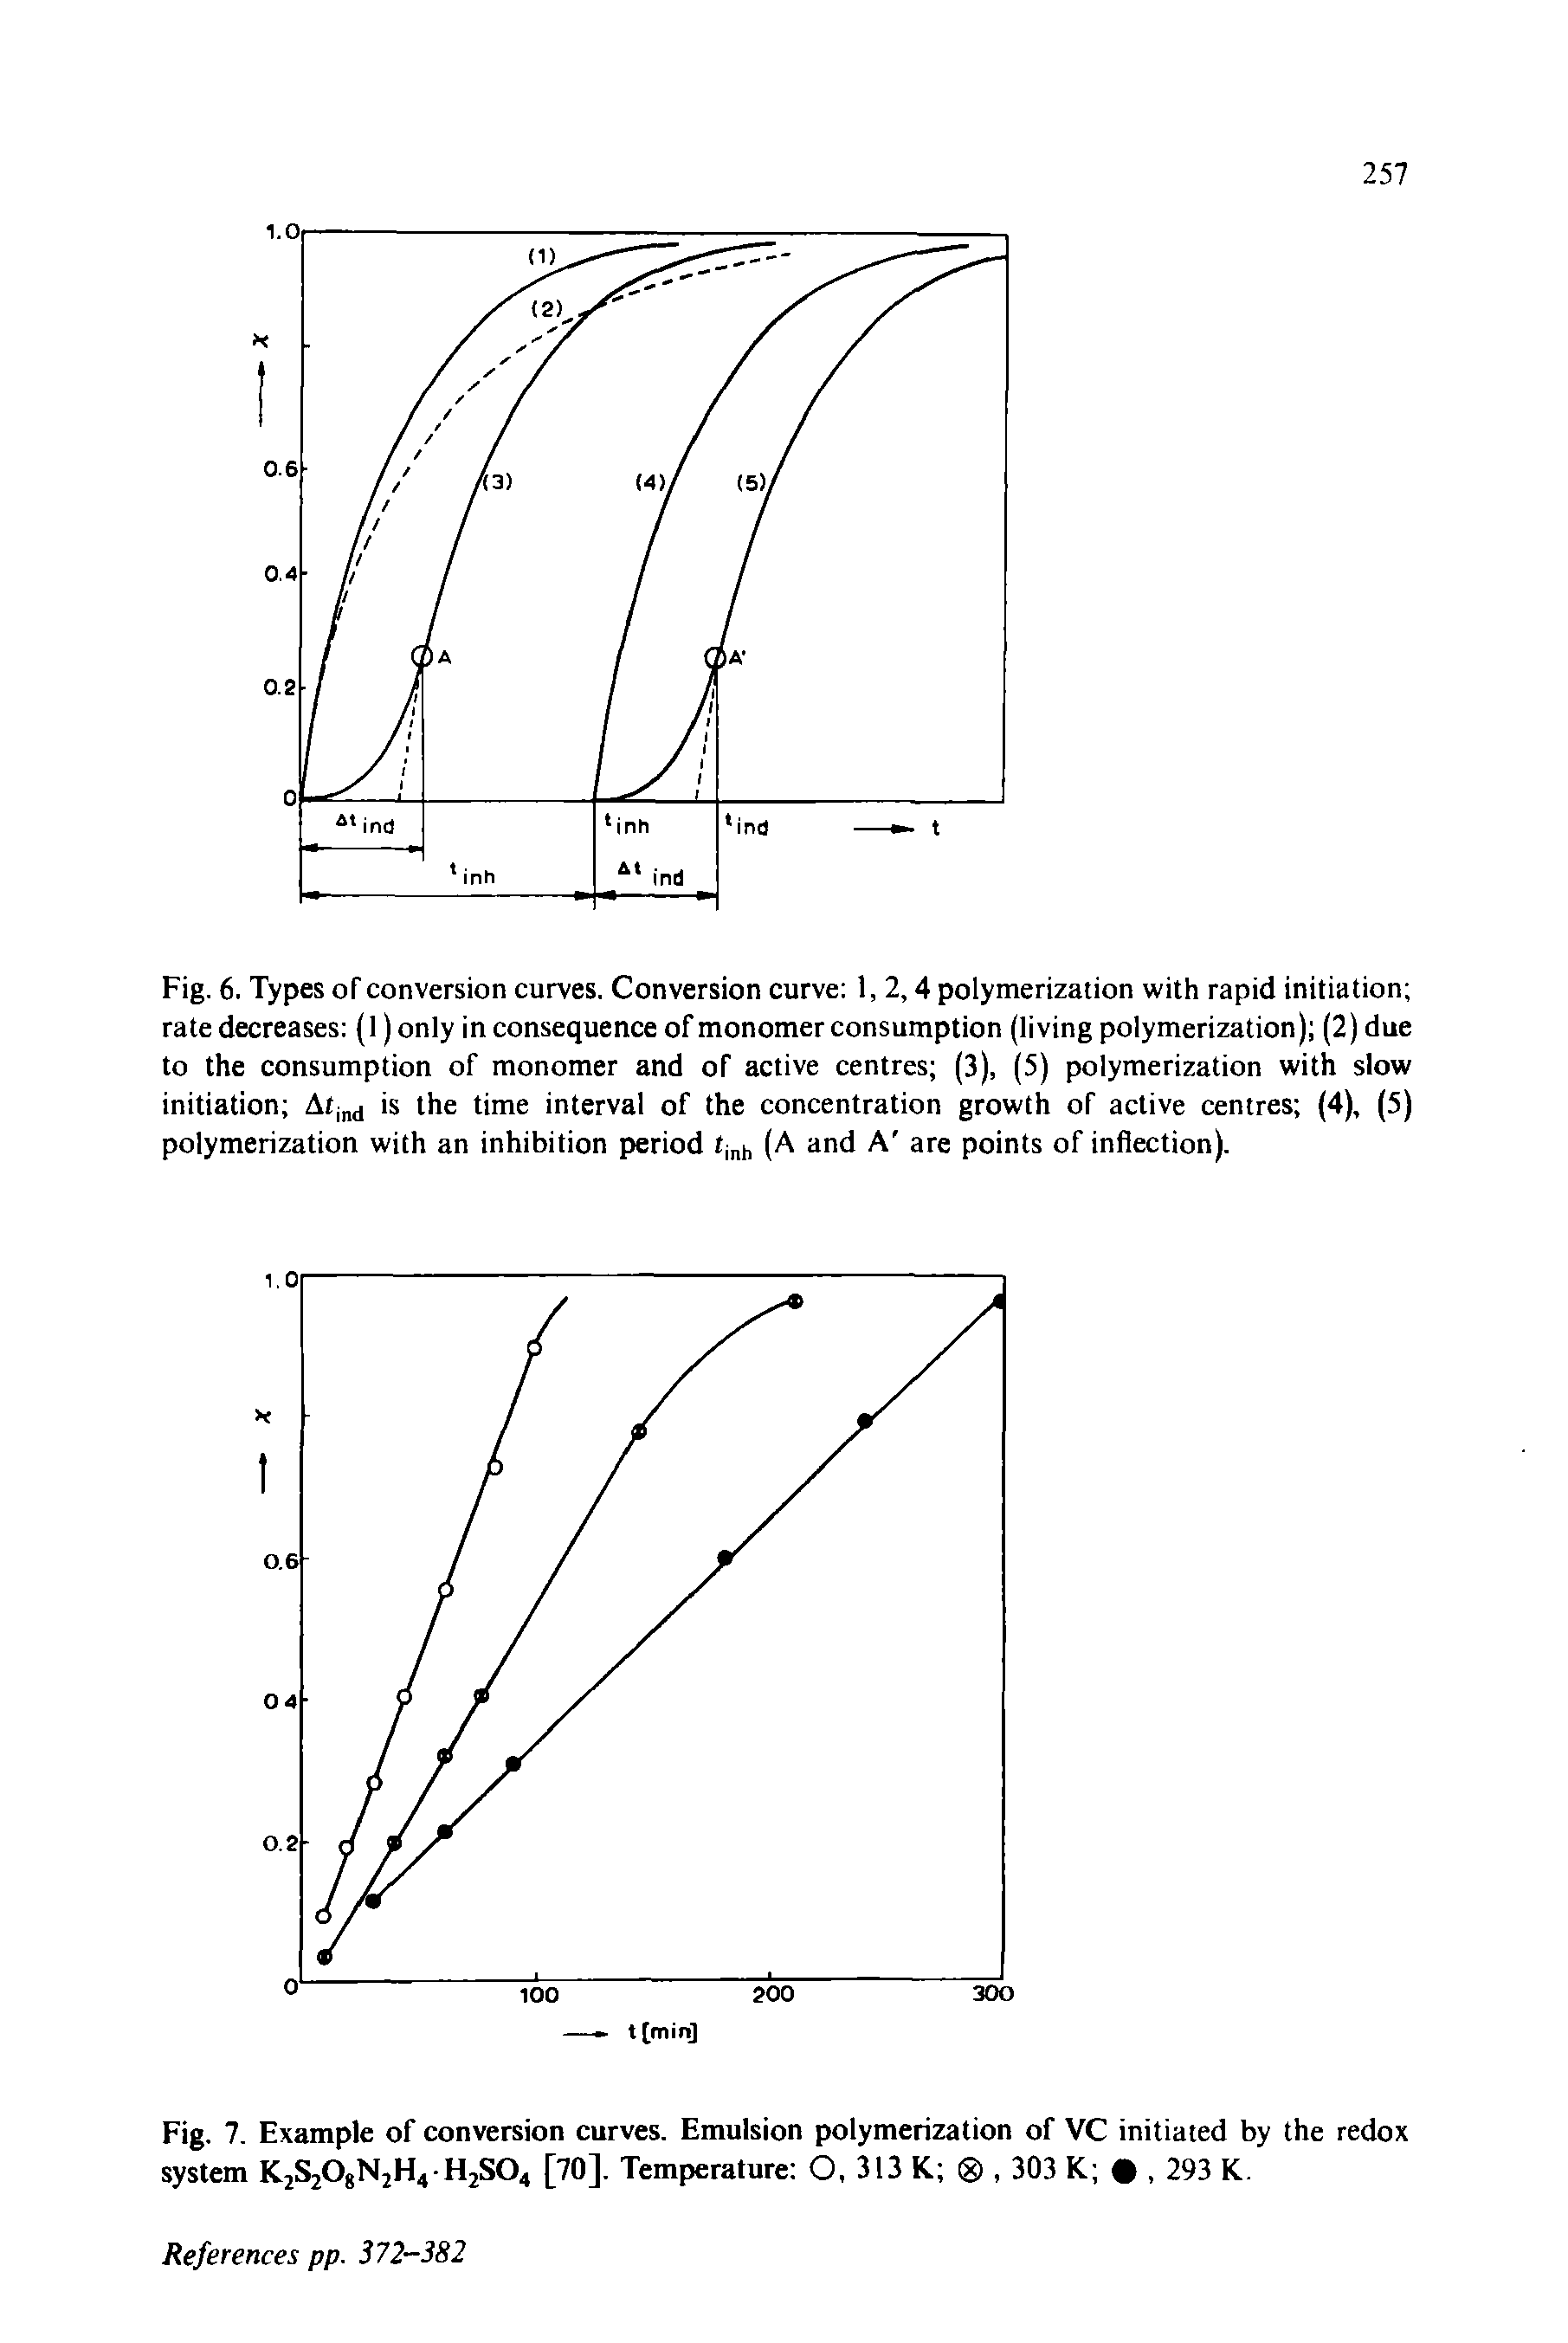 Fig. 6. Types of conversion curves. Conversion curve 1, 2,4 polymerization with rapid initiation rate decreases (1) only inconsequence of monomer consumption (living polymerization) (2) due to the consumption of monomer and of active centres (3), (5) polymerization with slow initiation Atind is the time interval of the concentration growth of active centres (4), (5) polymerization with an inhibition period tinh (A and A are points of inflection).